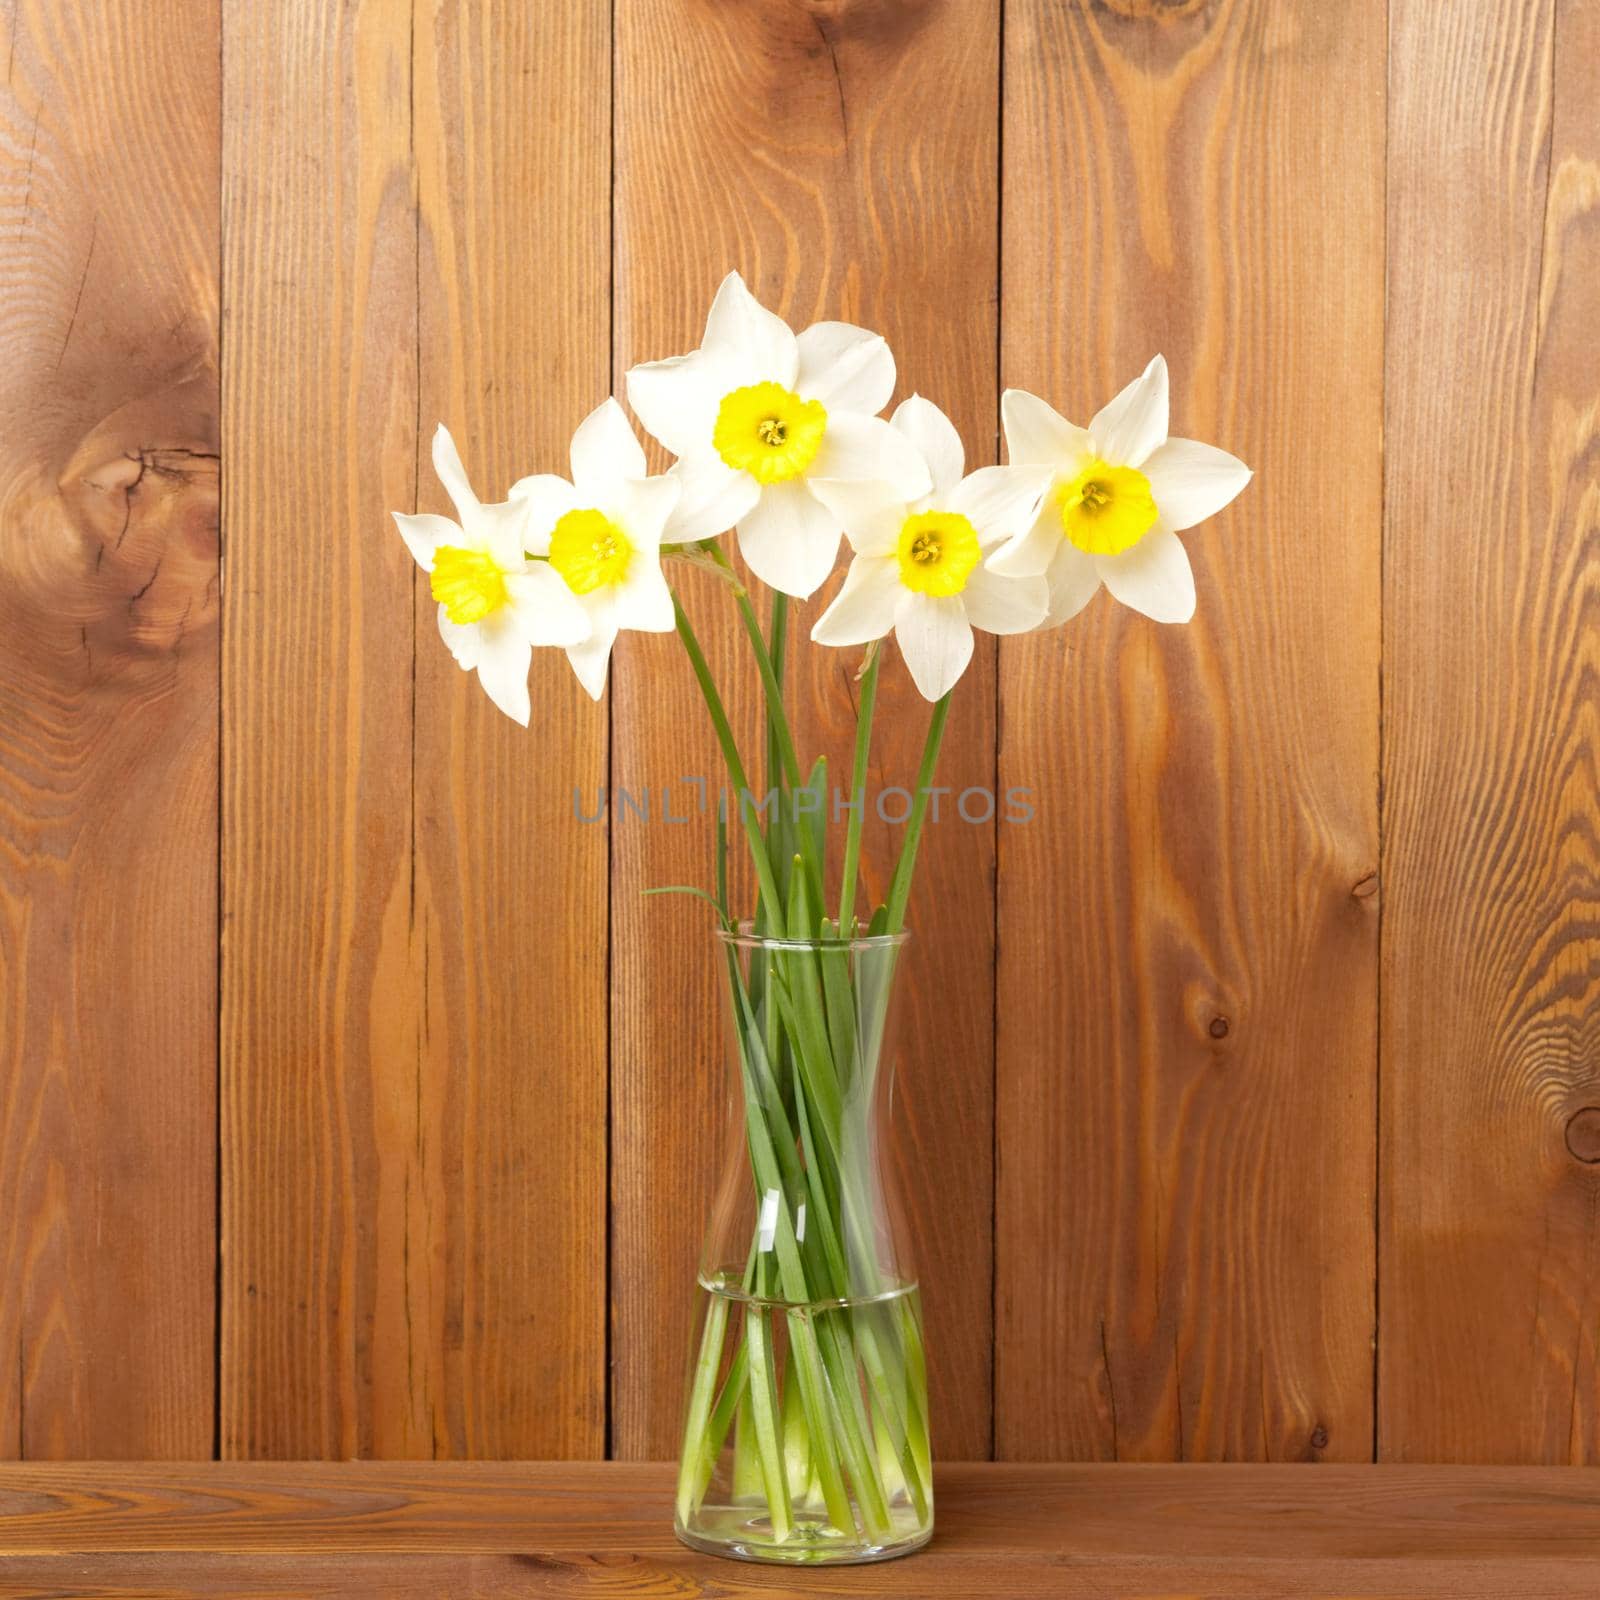 Bouquet of fresh flowers, daffodils in vase in the middle of wooden table, opposite brown wooden wall. Empty space for text.